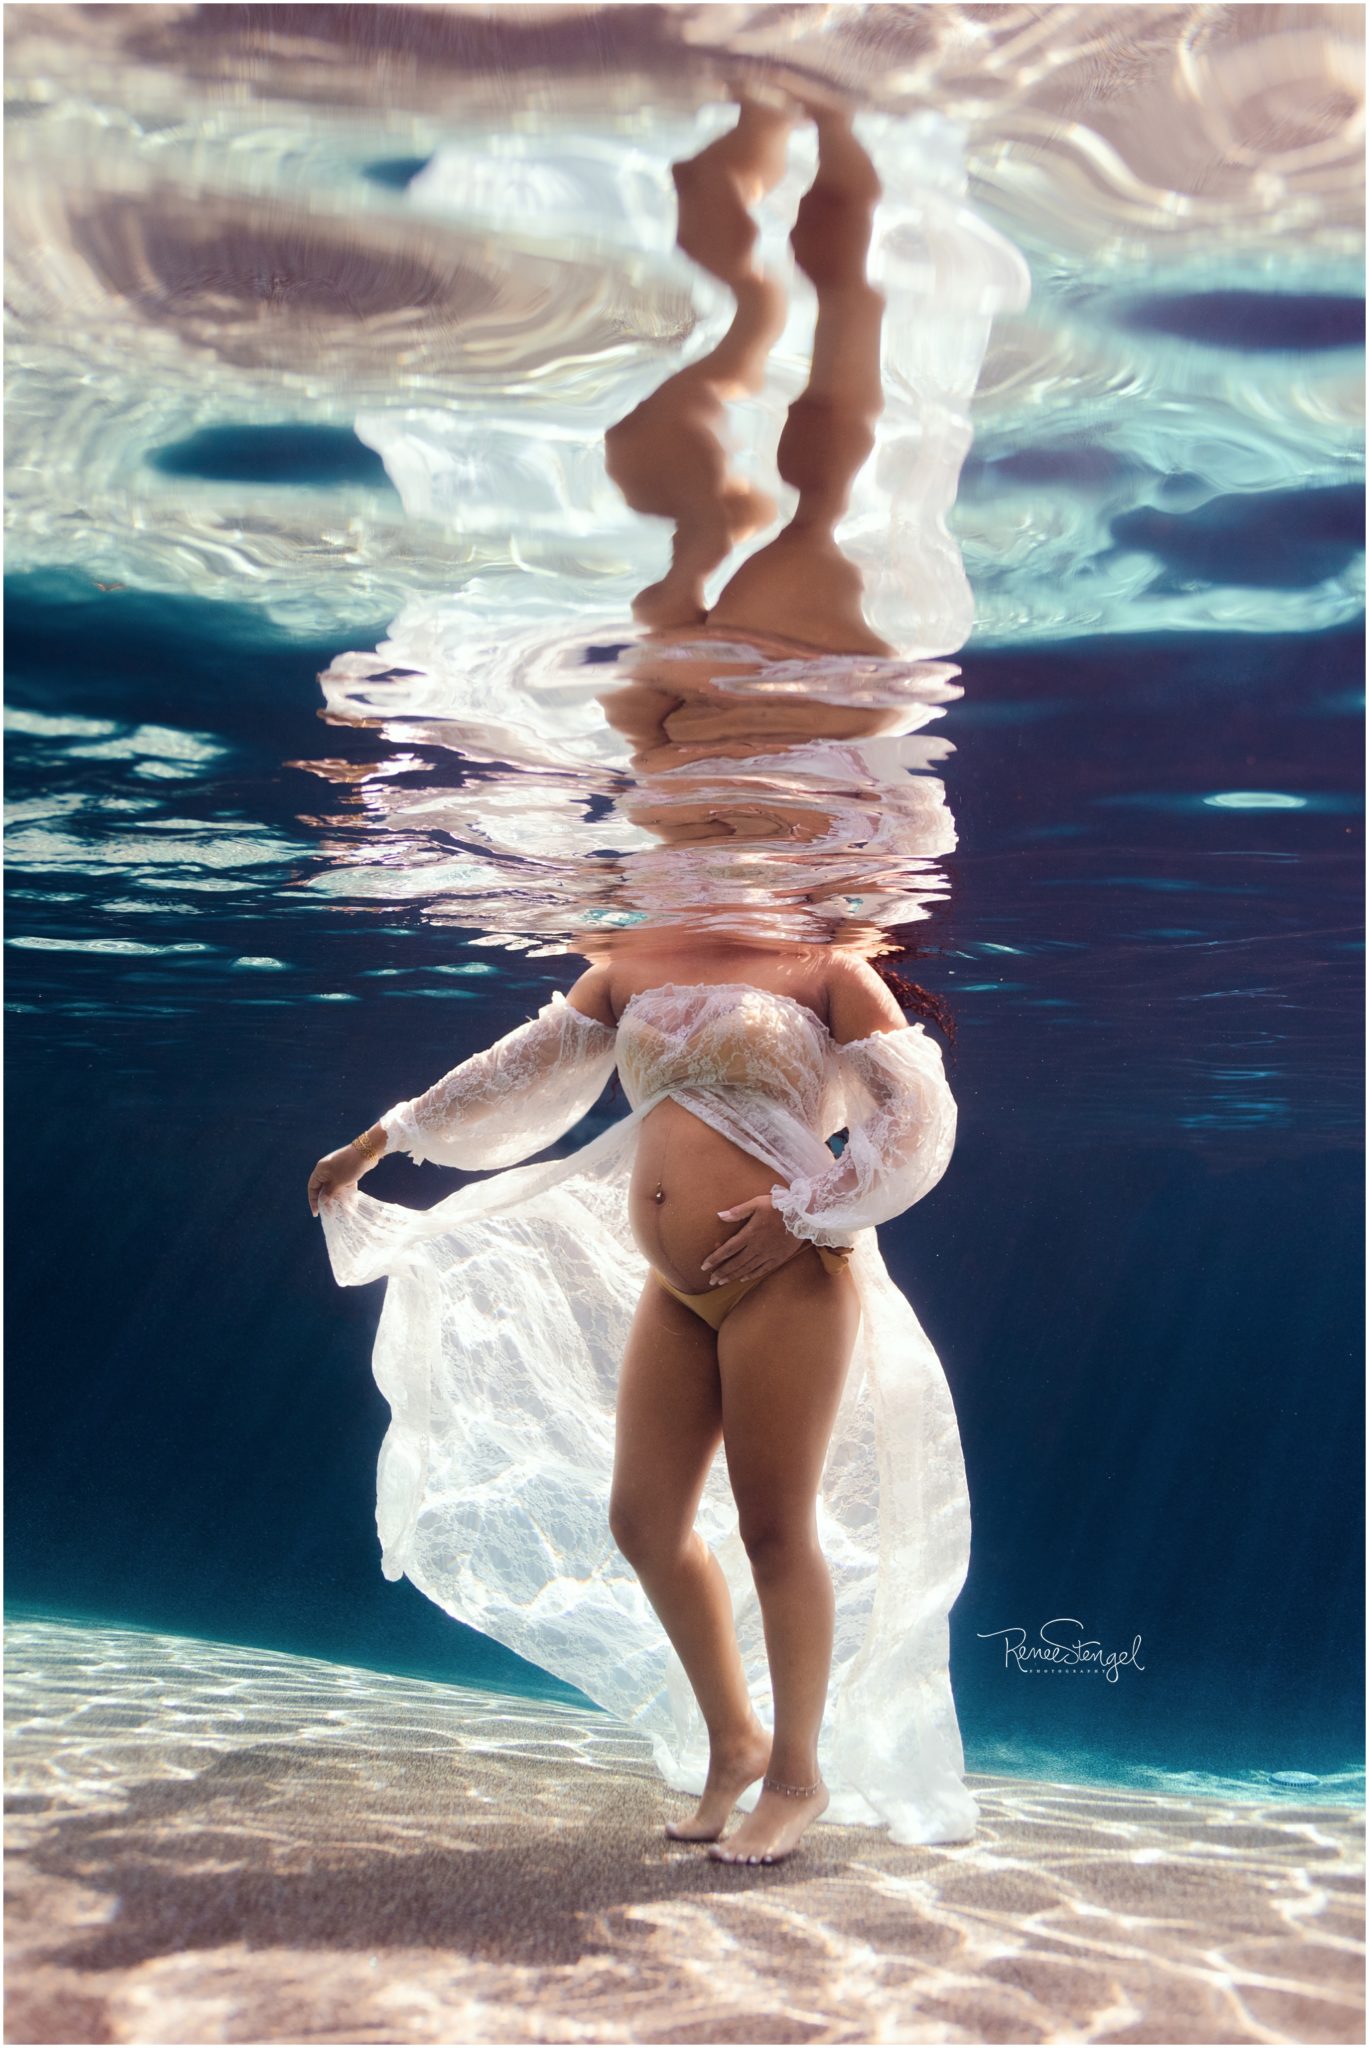 African American Underwater Maternity Session with white lace dress and tropical blue water